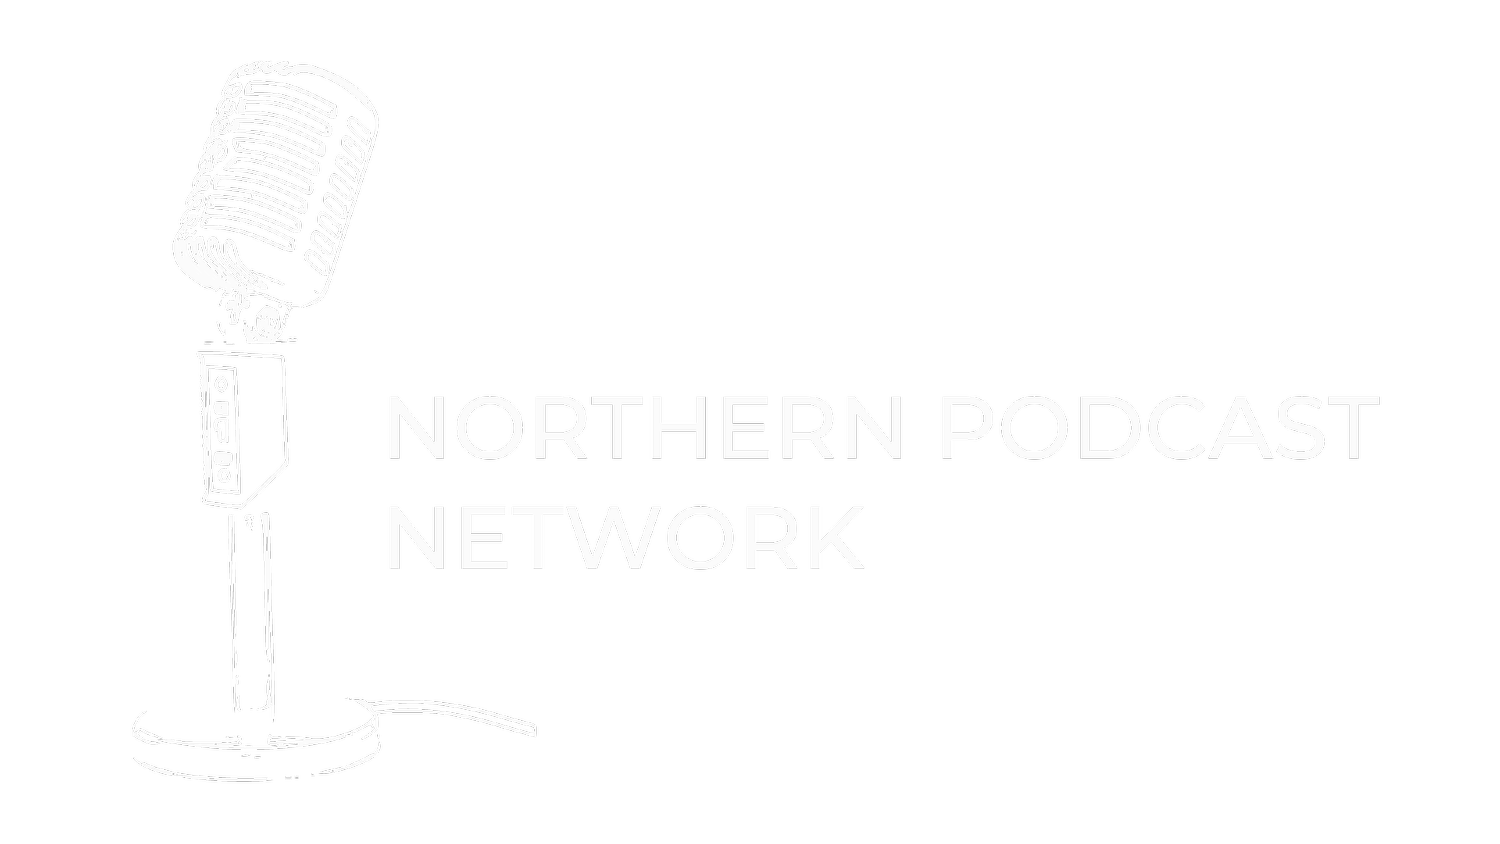 Northern Podcast Network